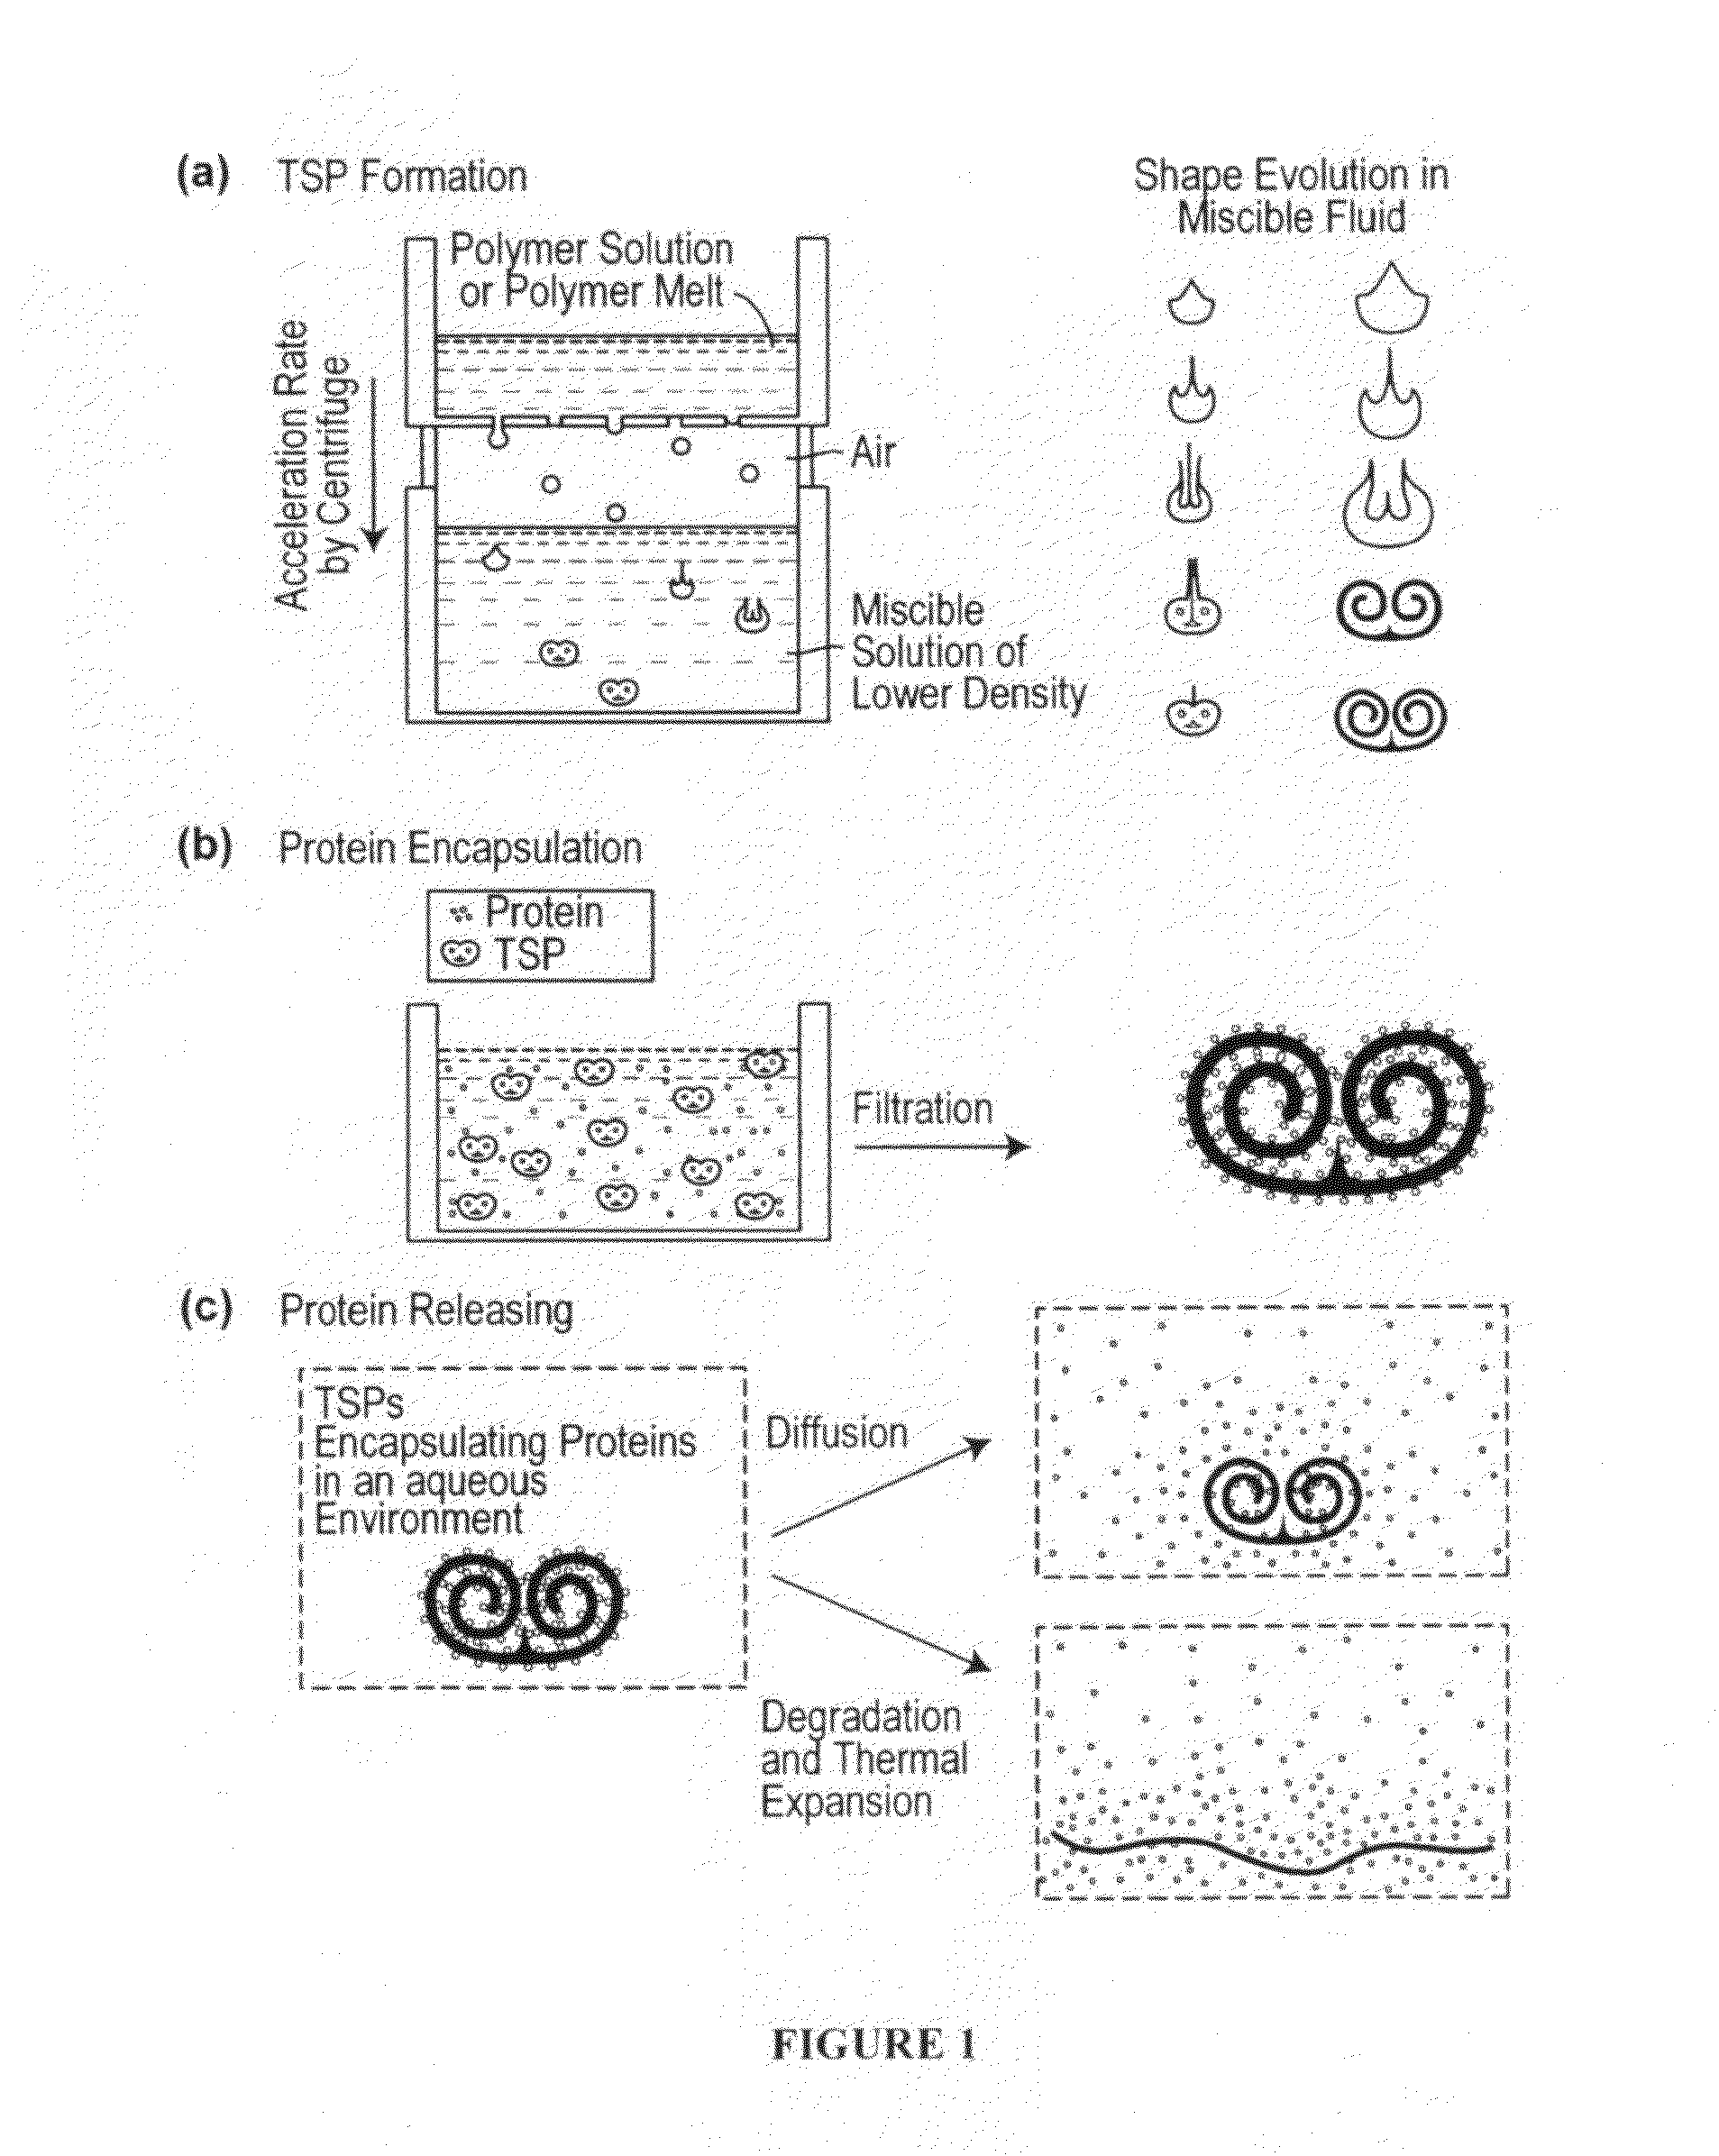 Self-Assembled Toroidal-Spiral Particles and Manufacture and Uses Thereof